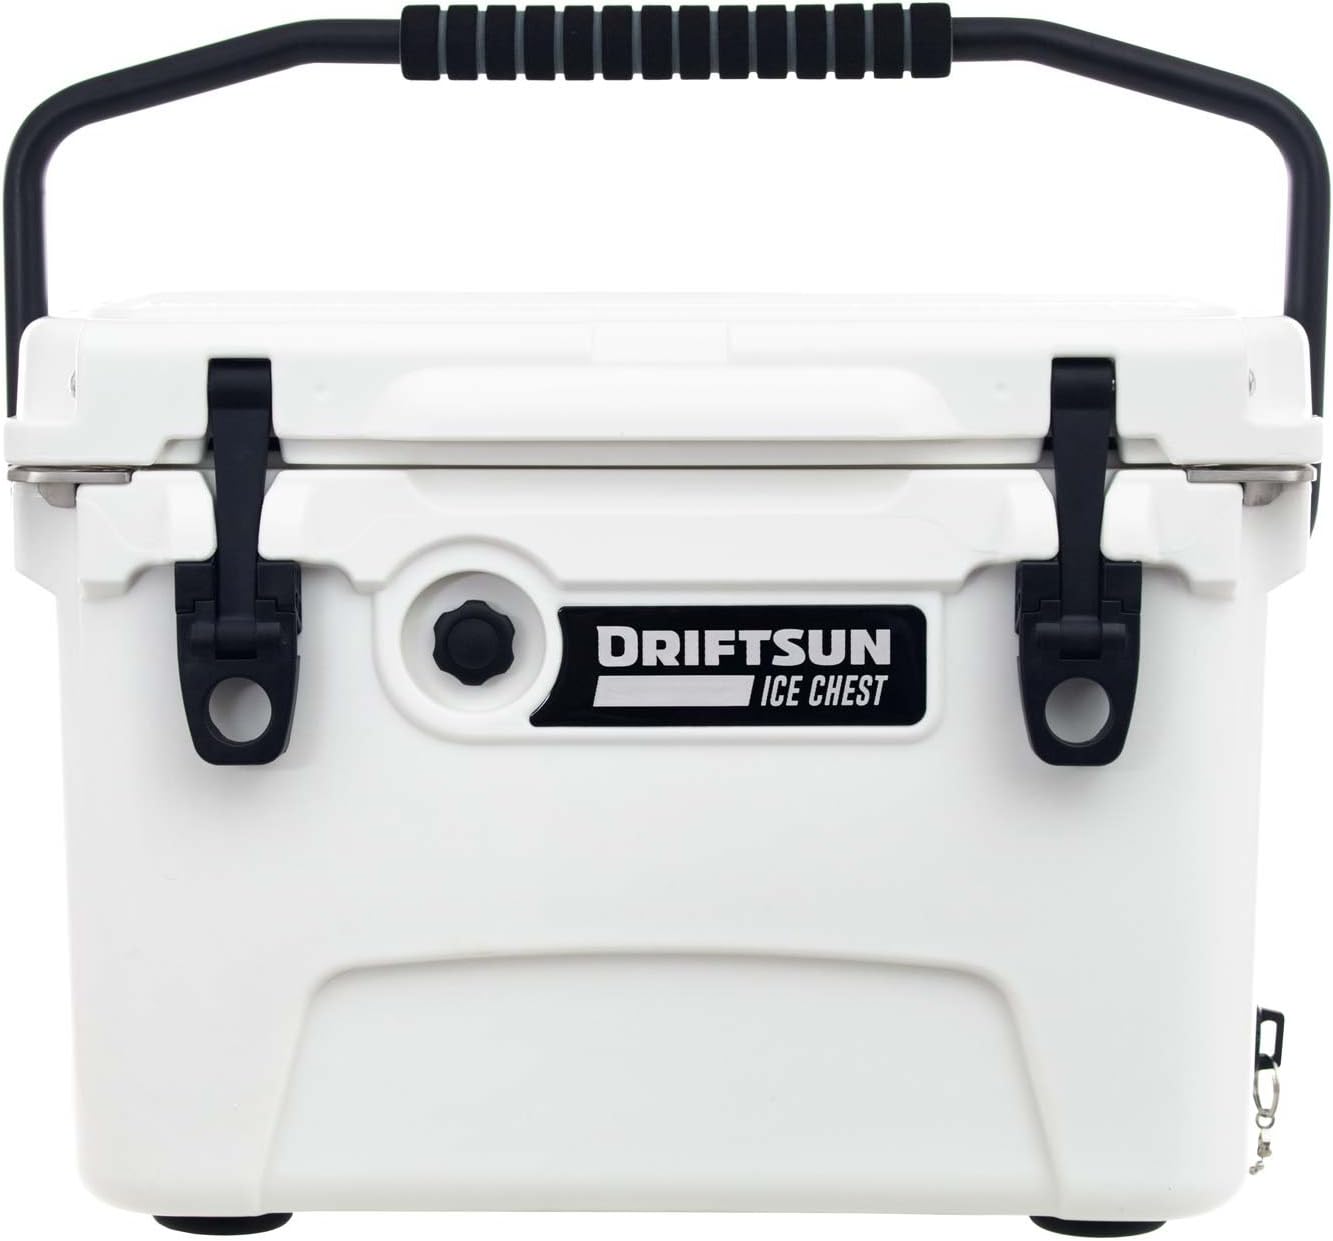 Driftsun Dry Goods Basket Coolers and Ice Chests